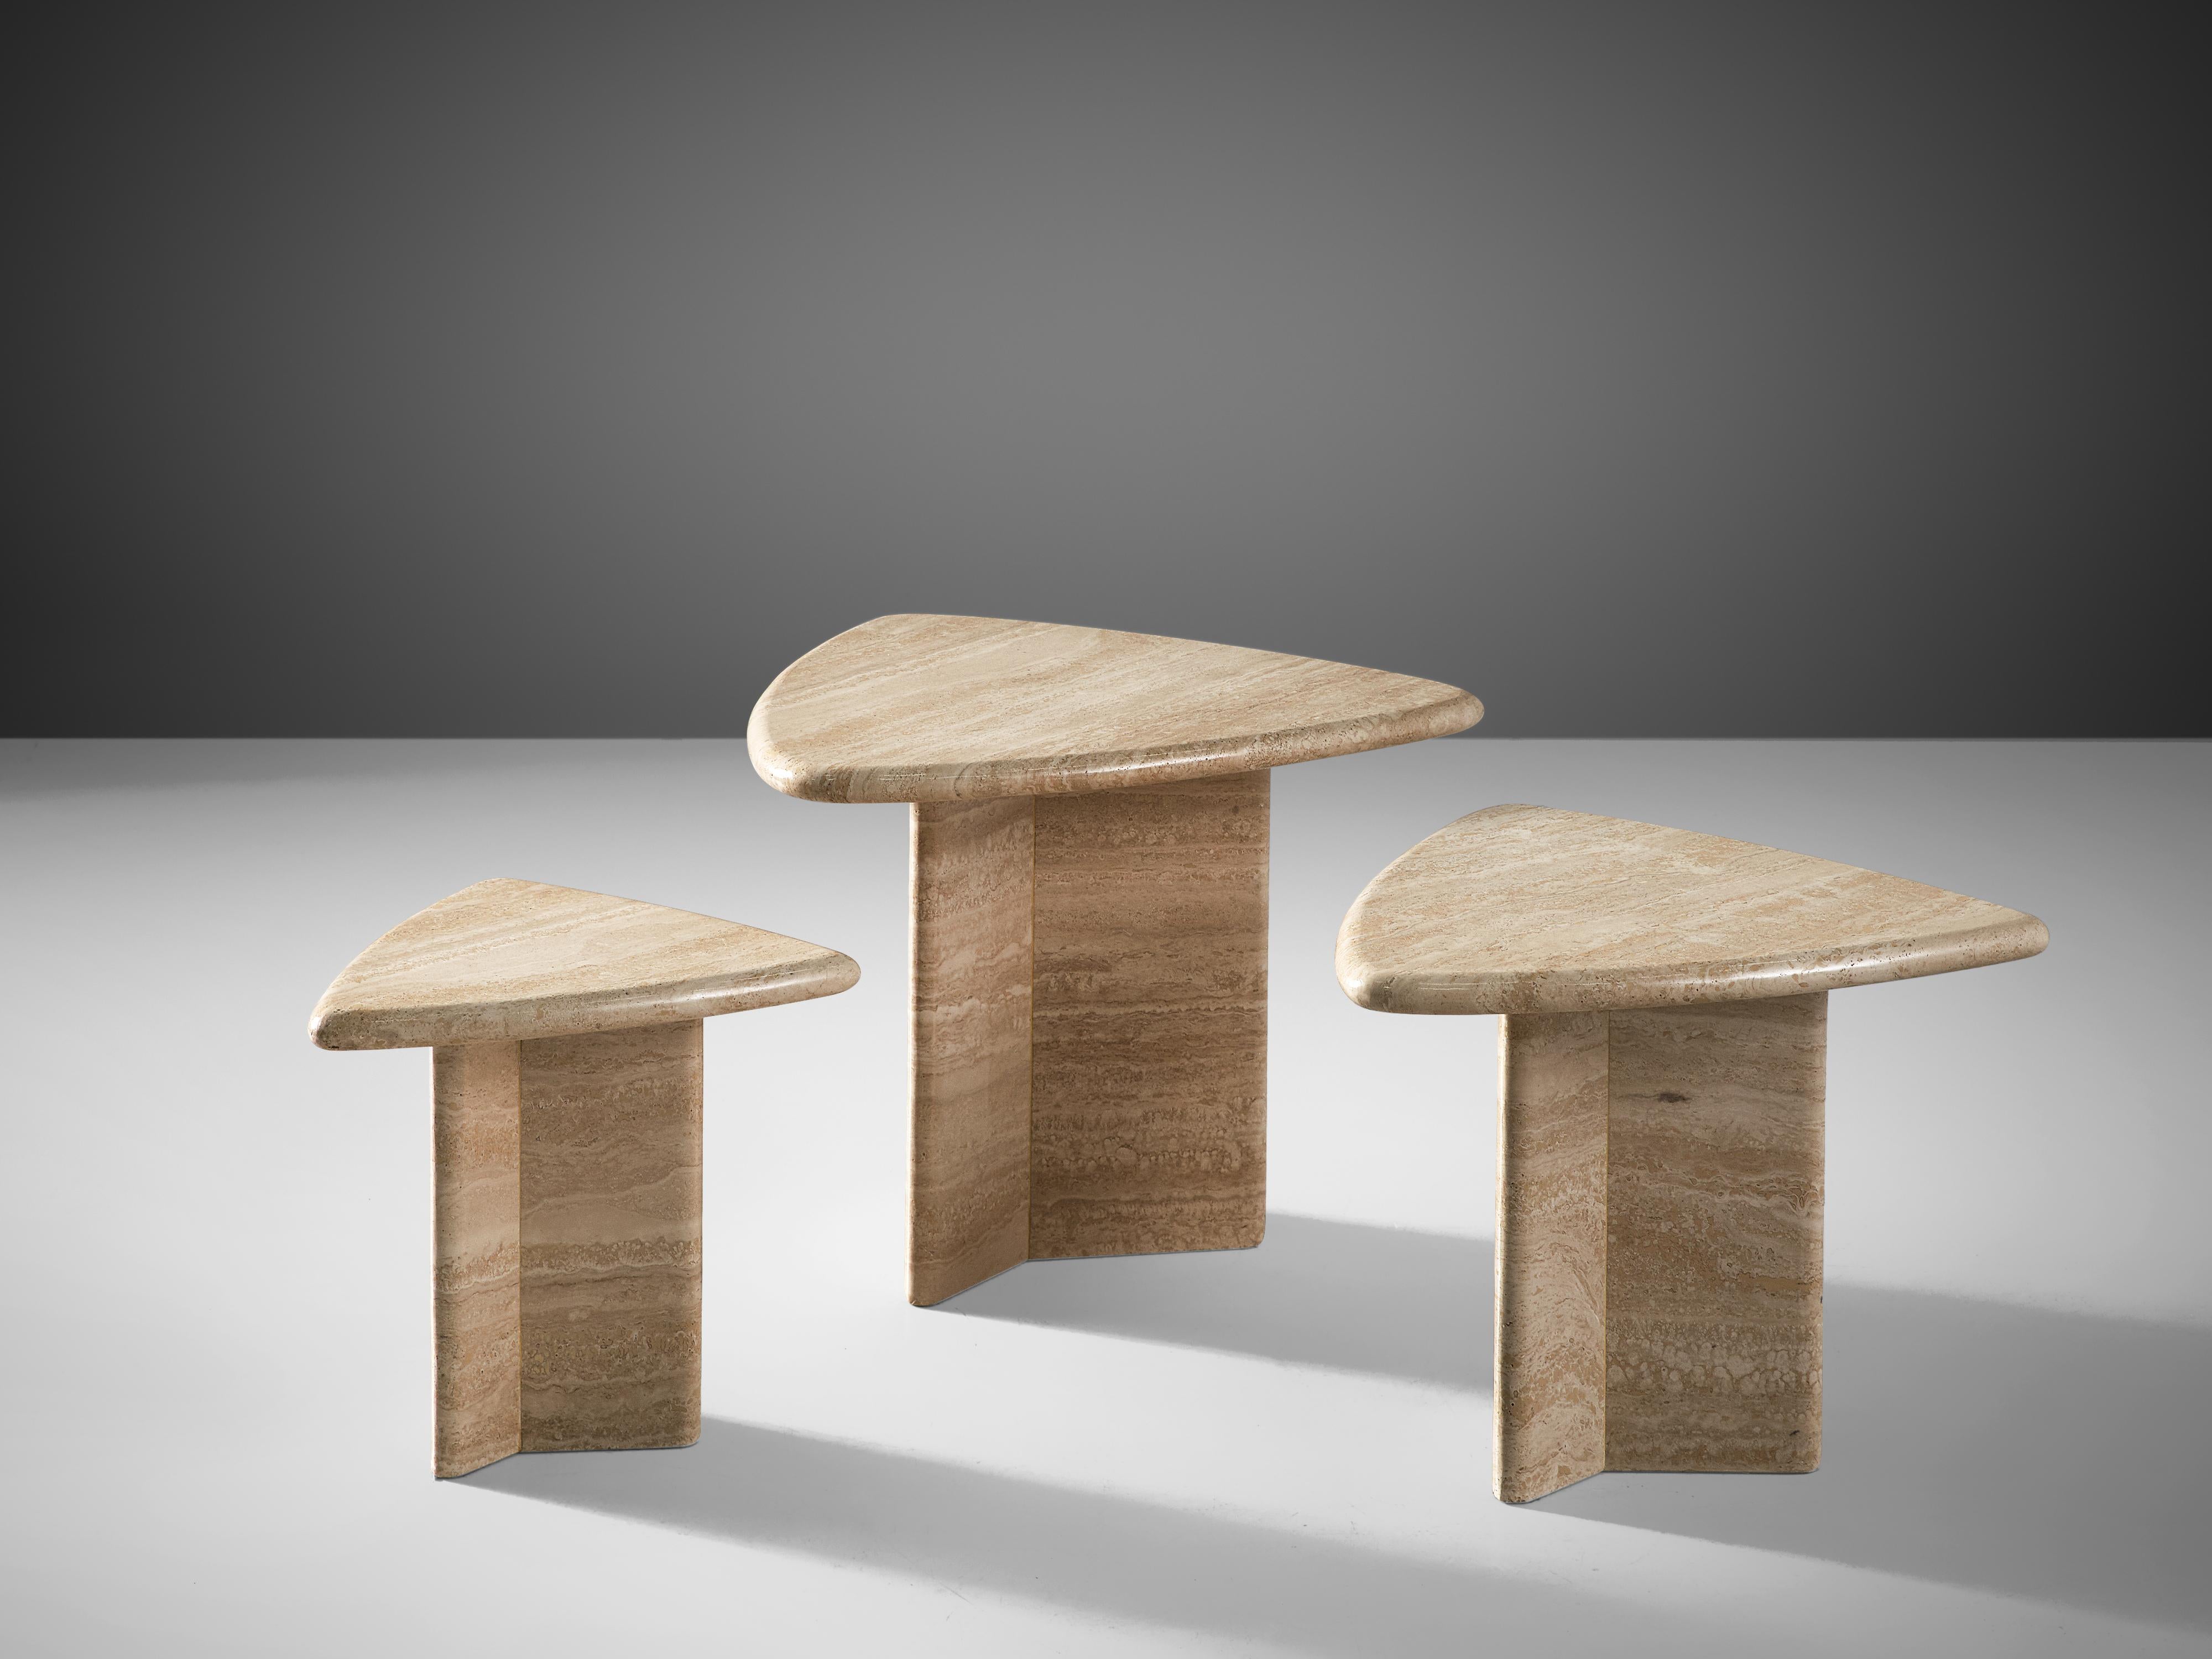 Set of three triangular travertine coffee tables, Italy, 1970.

This set of cocktail tables feature a triangular base and a triangular travertine tabletop. The circular tables have no joints or clamps and is architectural in its structure. The